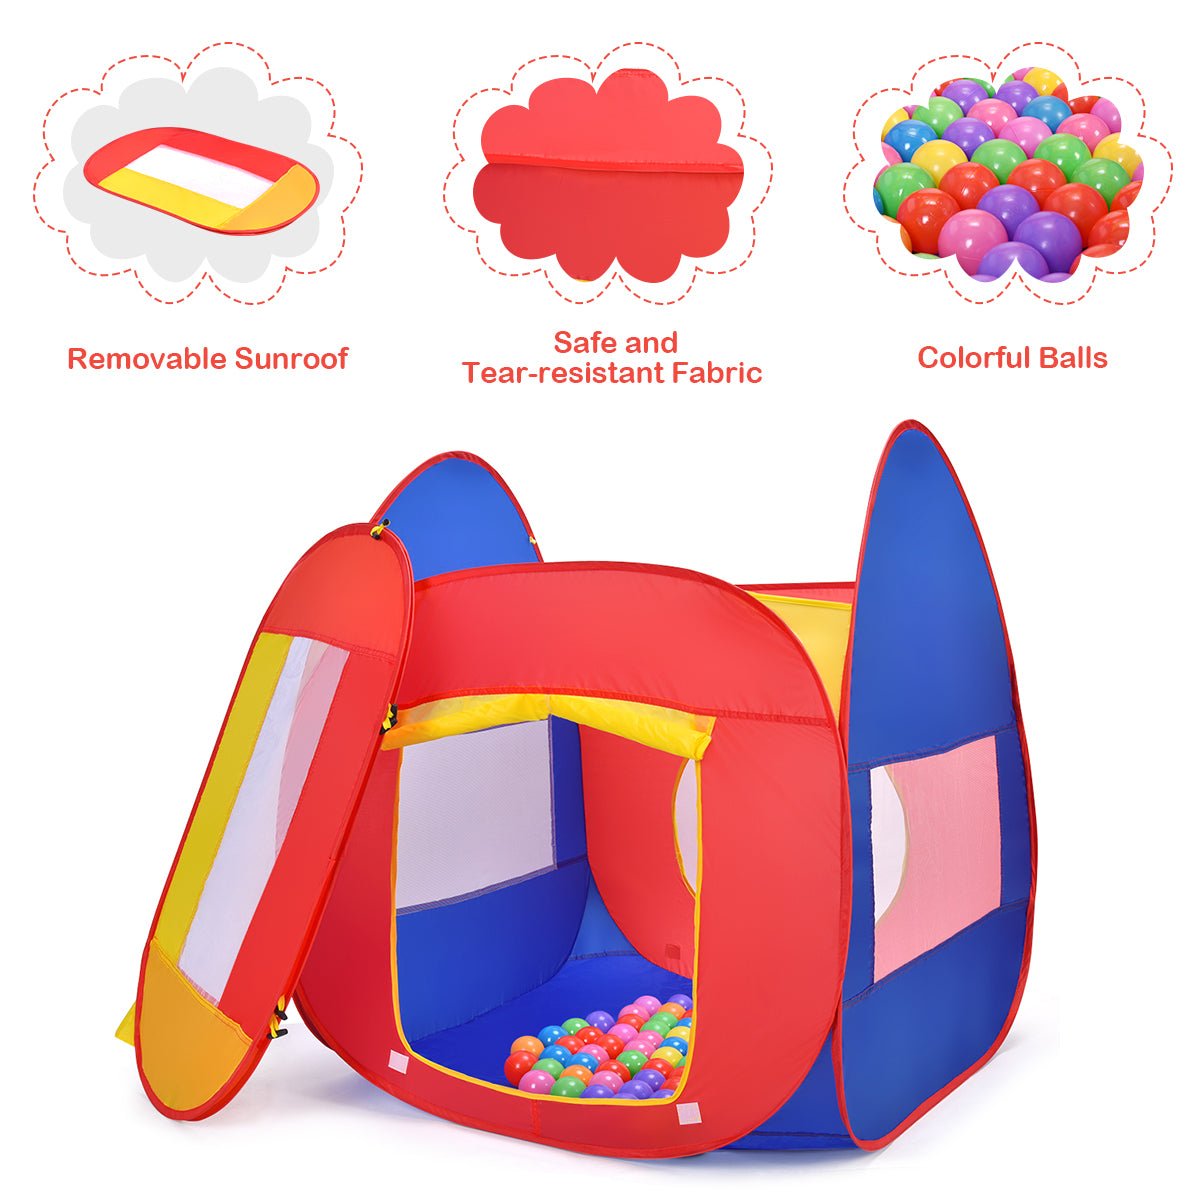 Boundless Joy: Baby Play House with 100 Balls for Imaginative Play